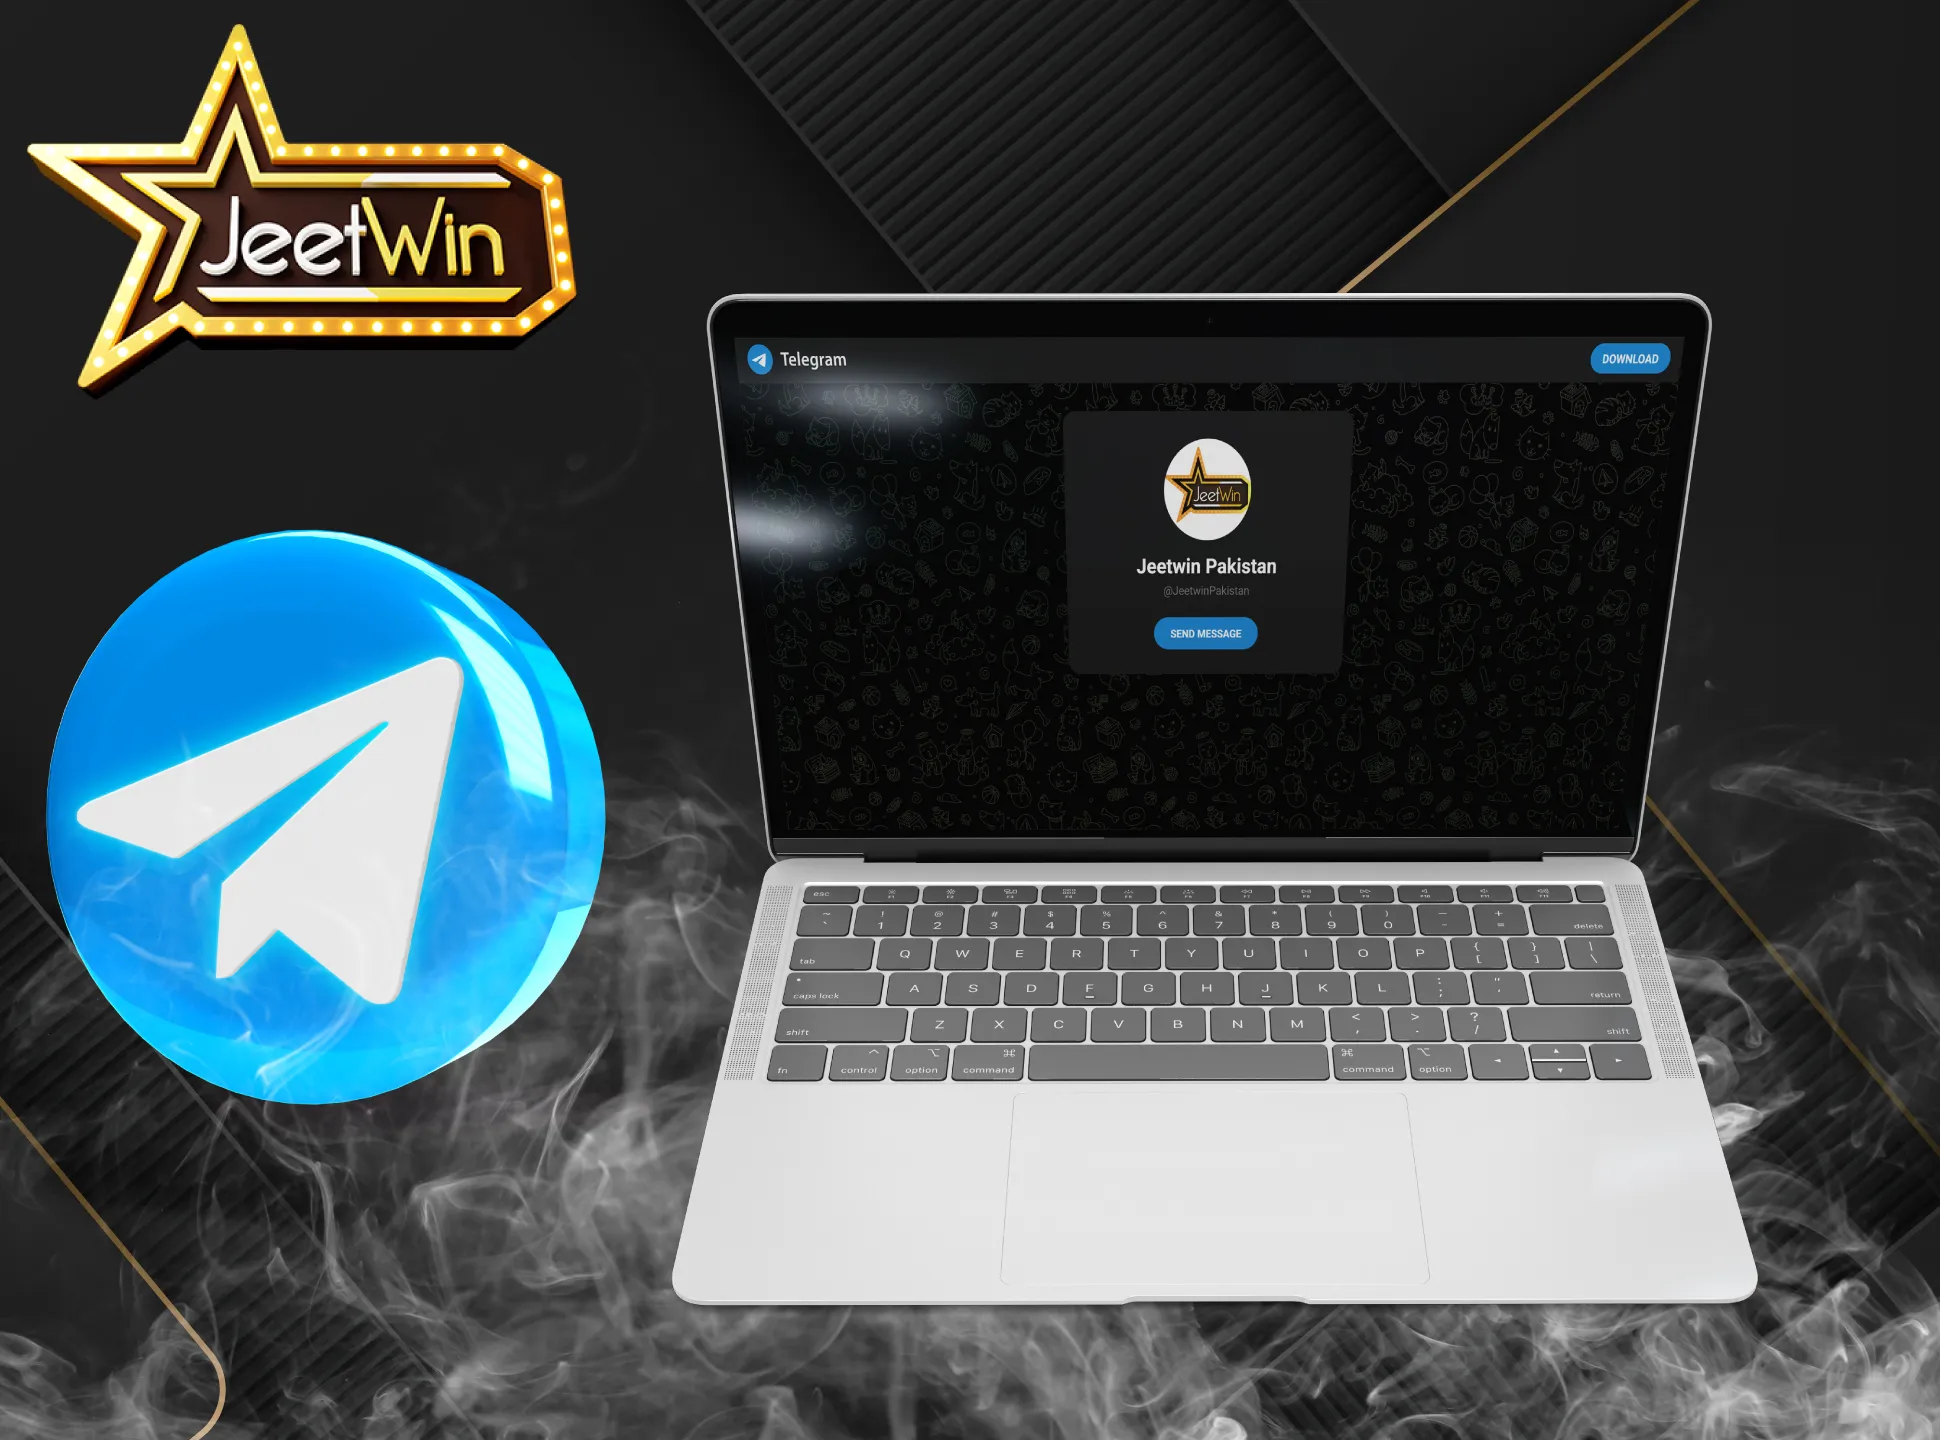 The Telegram bot JeetWin was created to help players.